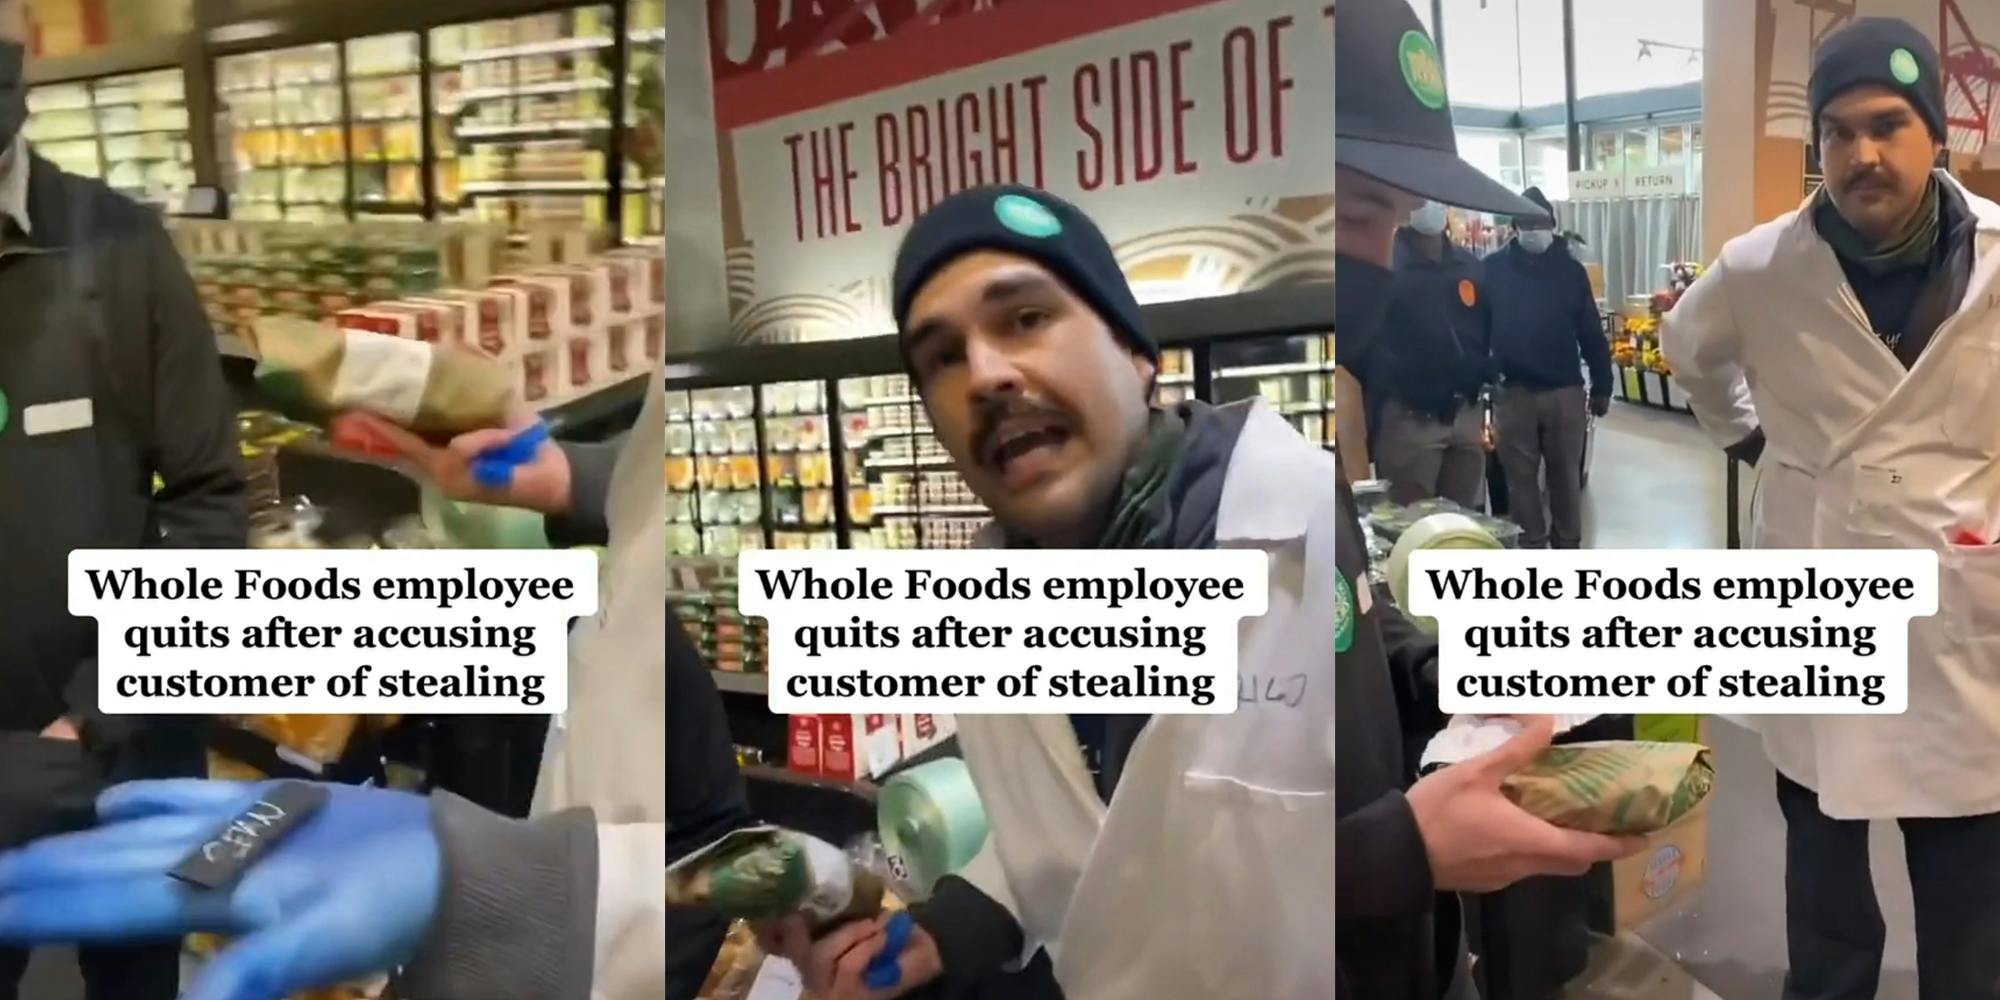 Whole Foods employees examining wrapped sub and receipt with captions "Whole Foods employee quits after accusing customer of stealing"